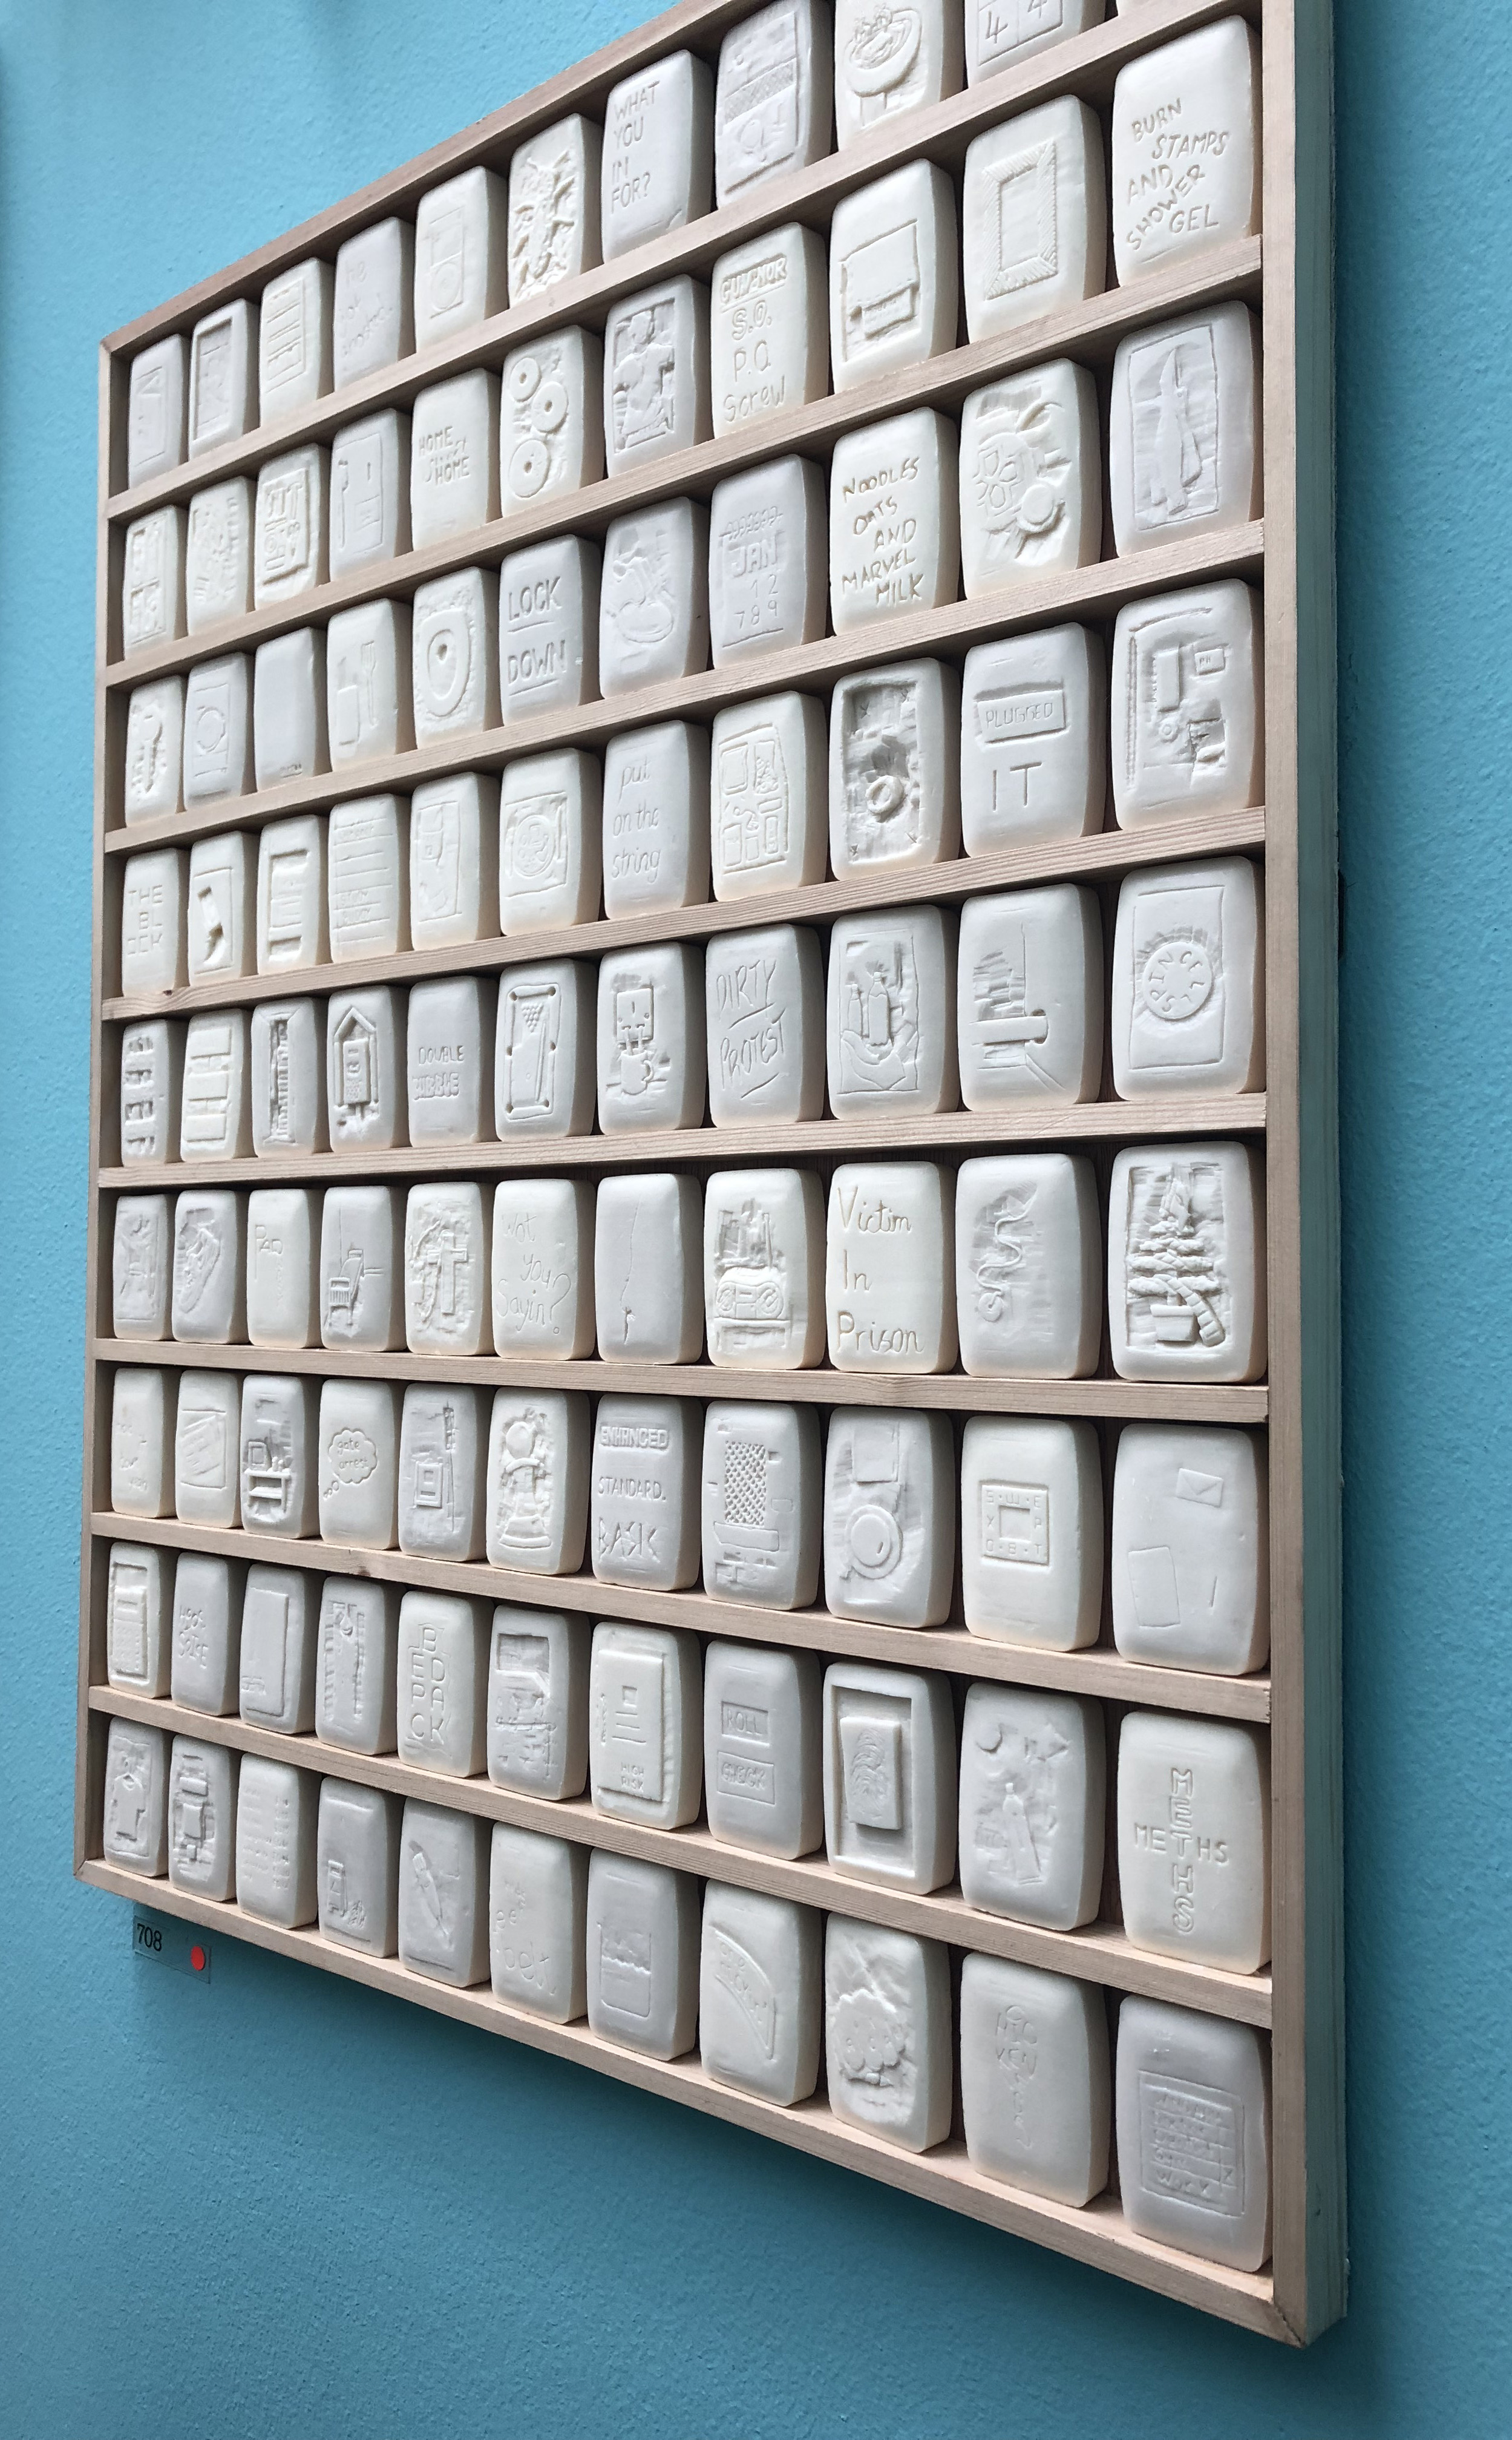 Lee Cutter, Prison Culture, Summer Exhibition 2018 Soap Bars with Engravings